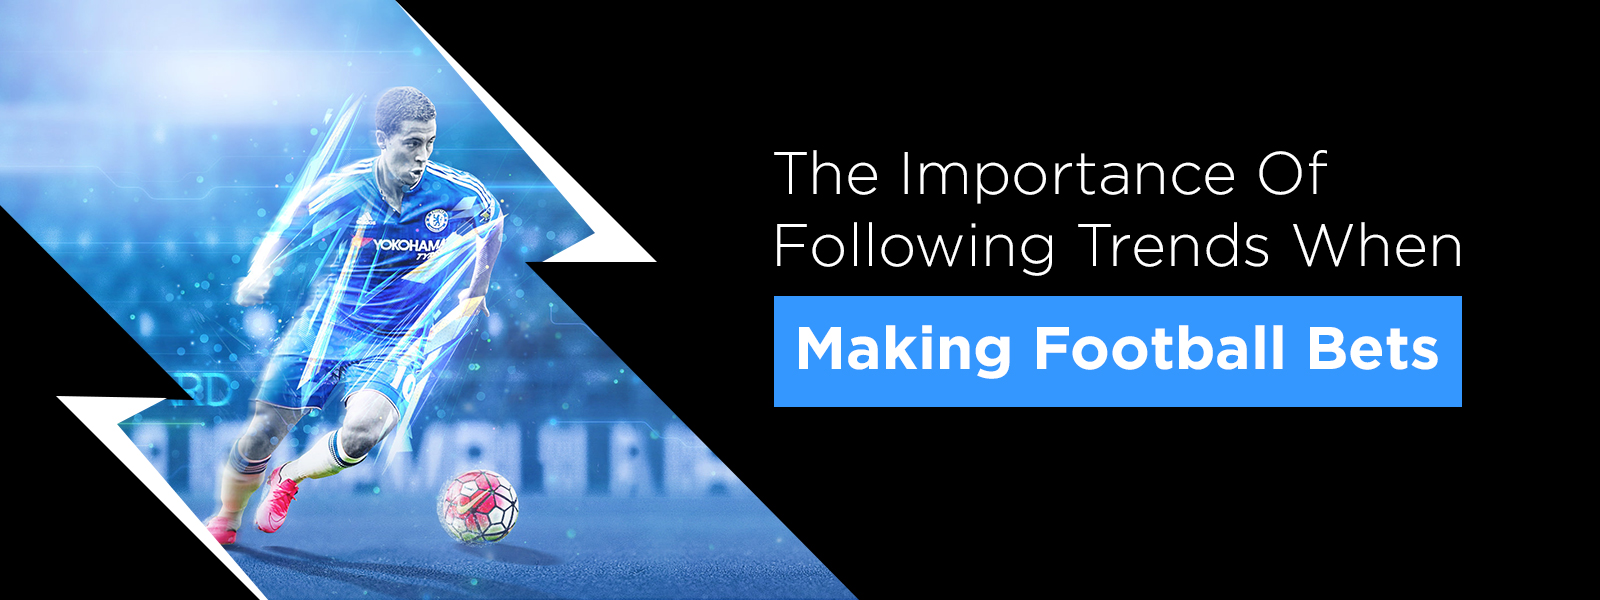 The Importance Of Following Betting Trends When Making Football Bets